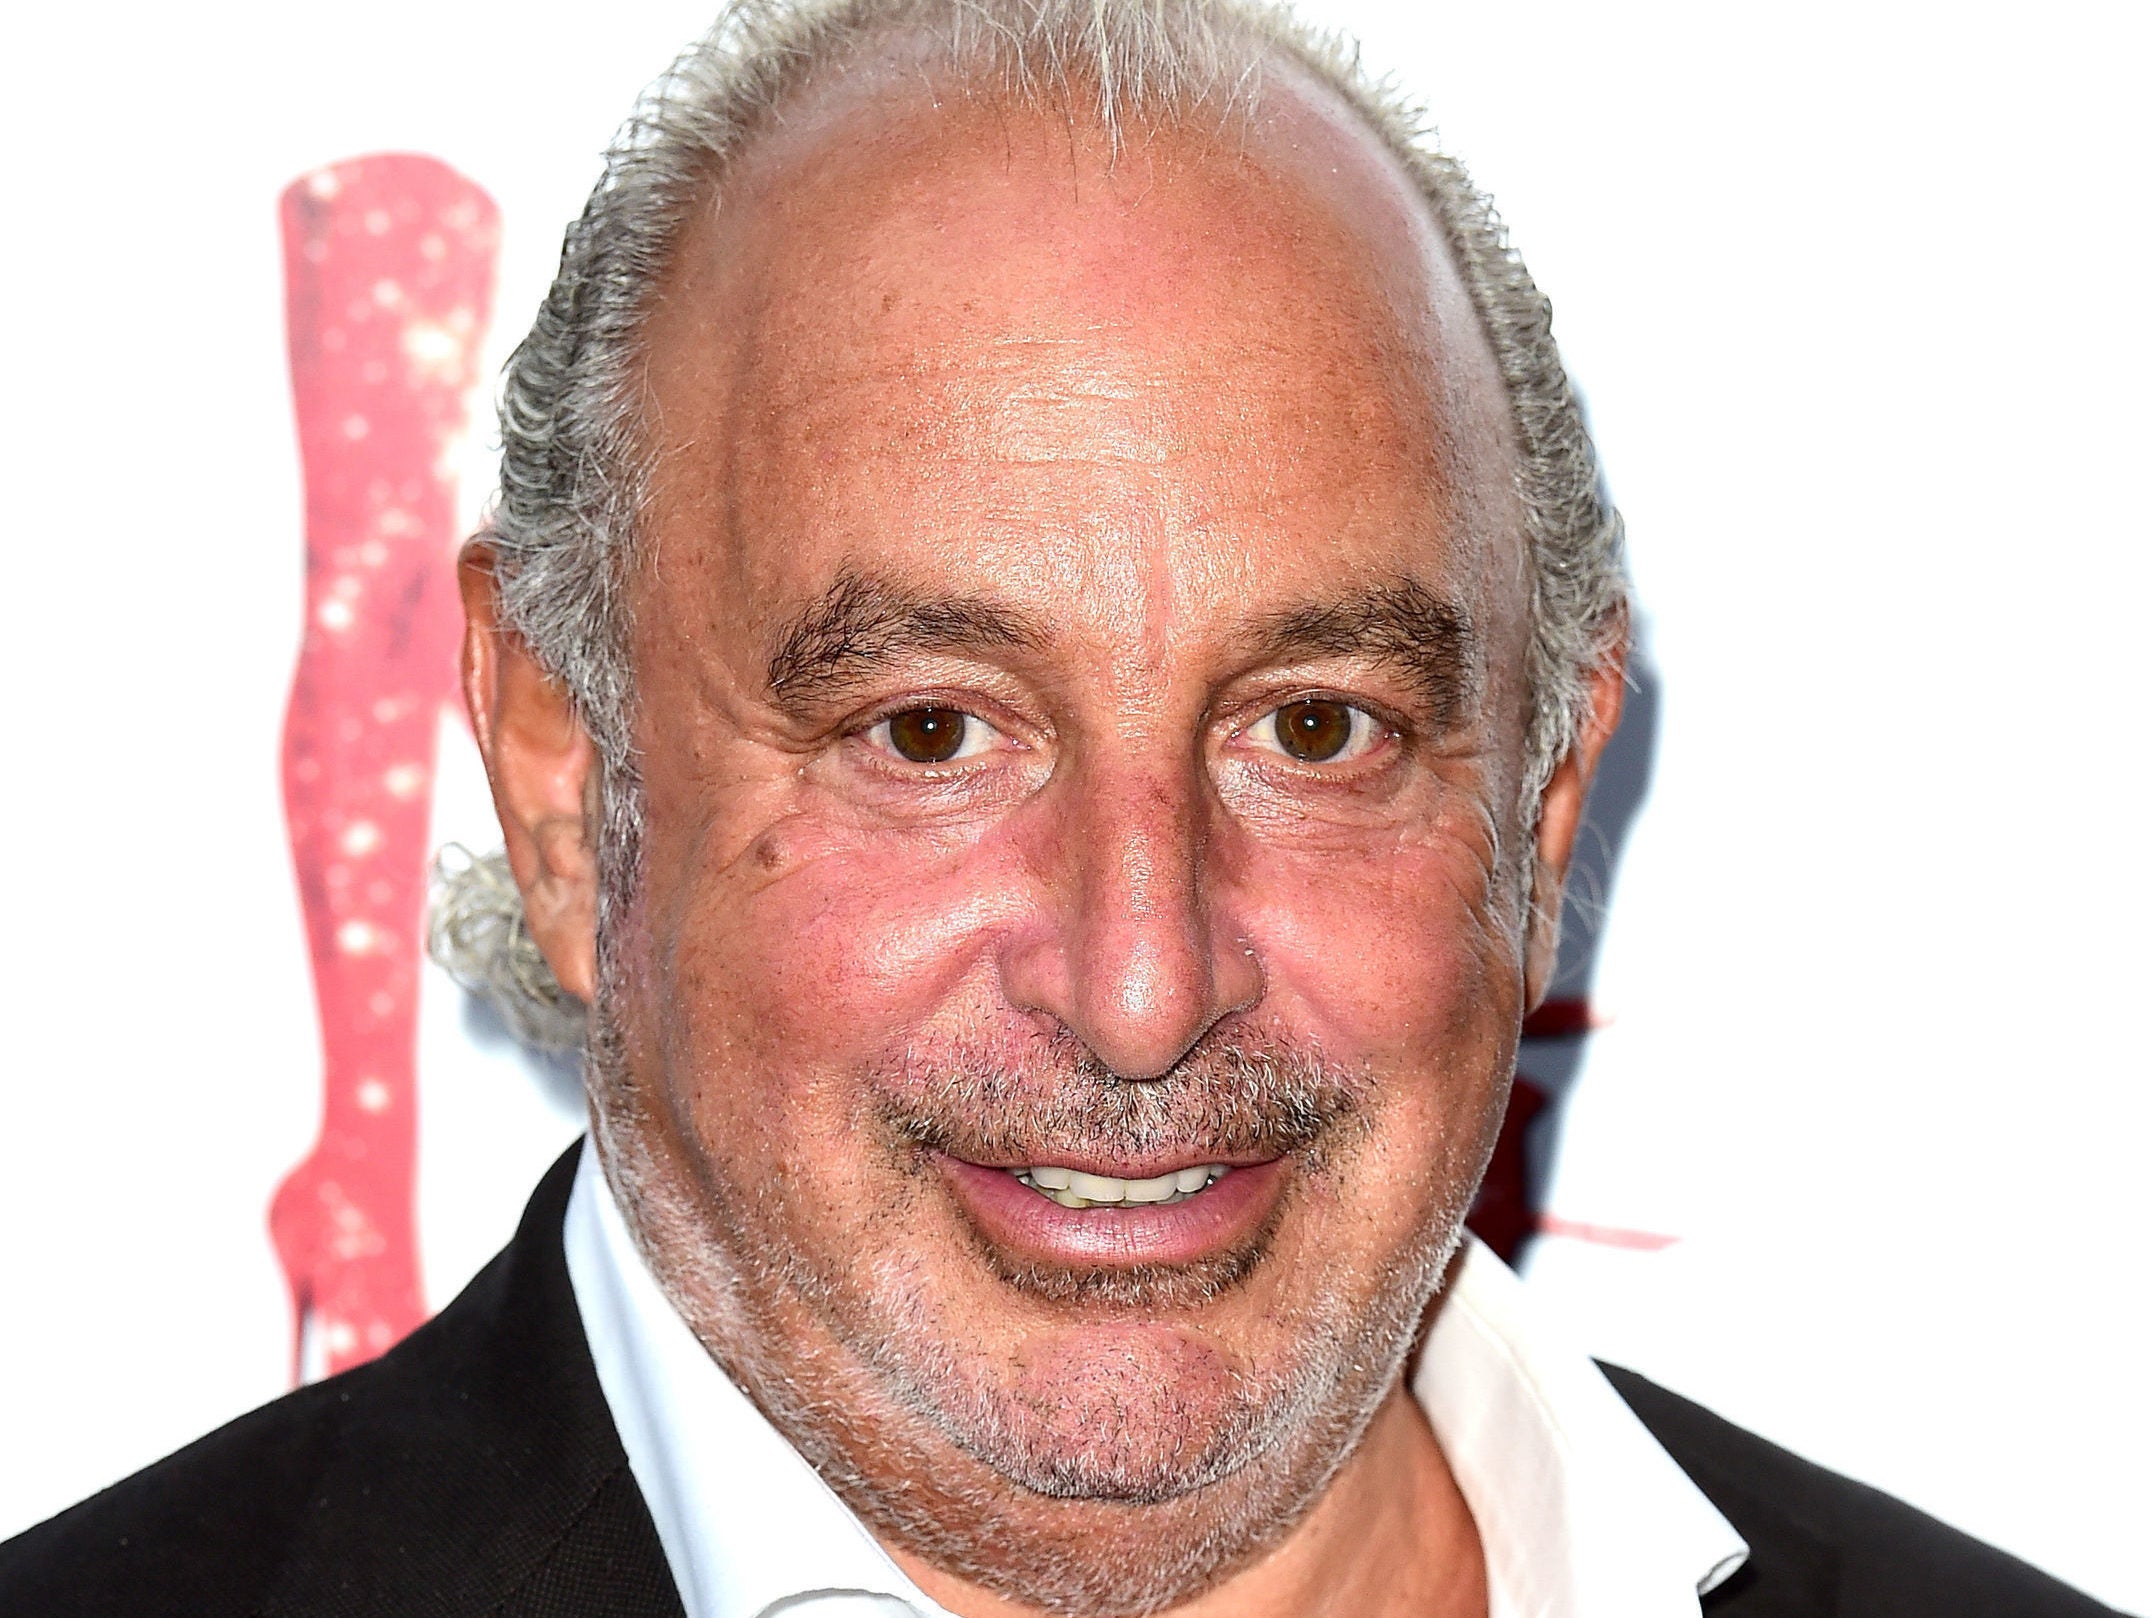 Telegraph to report details of allegations against Topshop boss Sir Philip Green after £3m injunction dropped